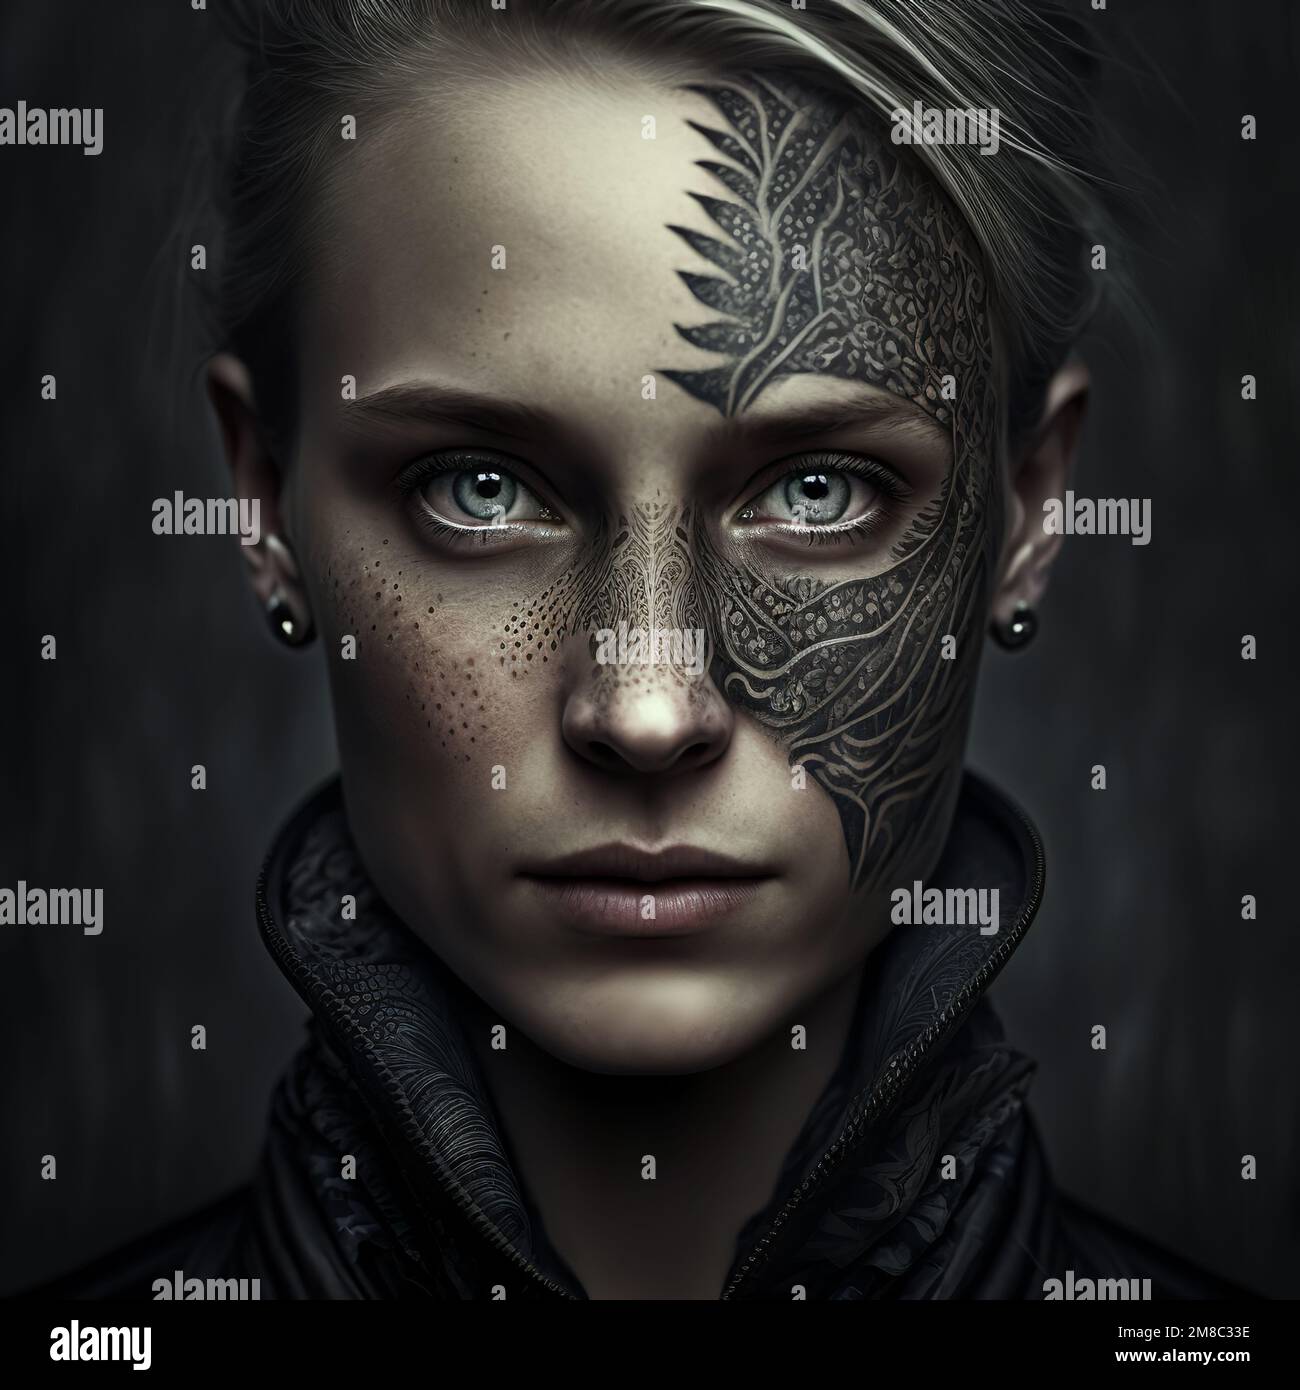 Download A Man With Tattoos On His Face | Wallpapers.com